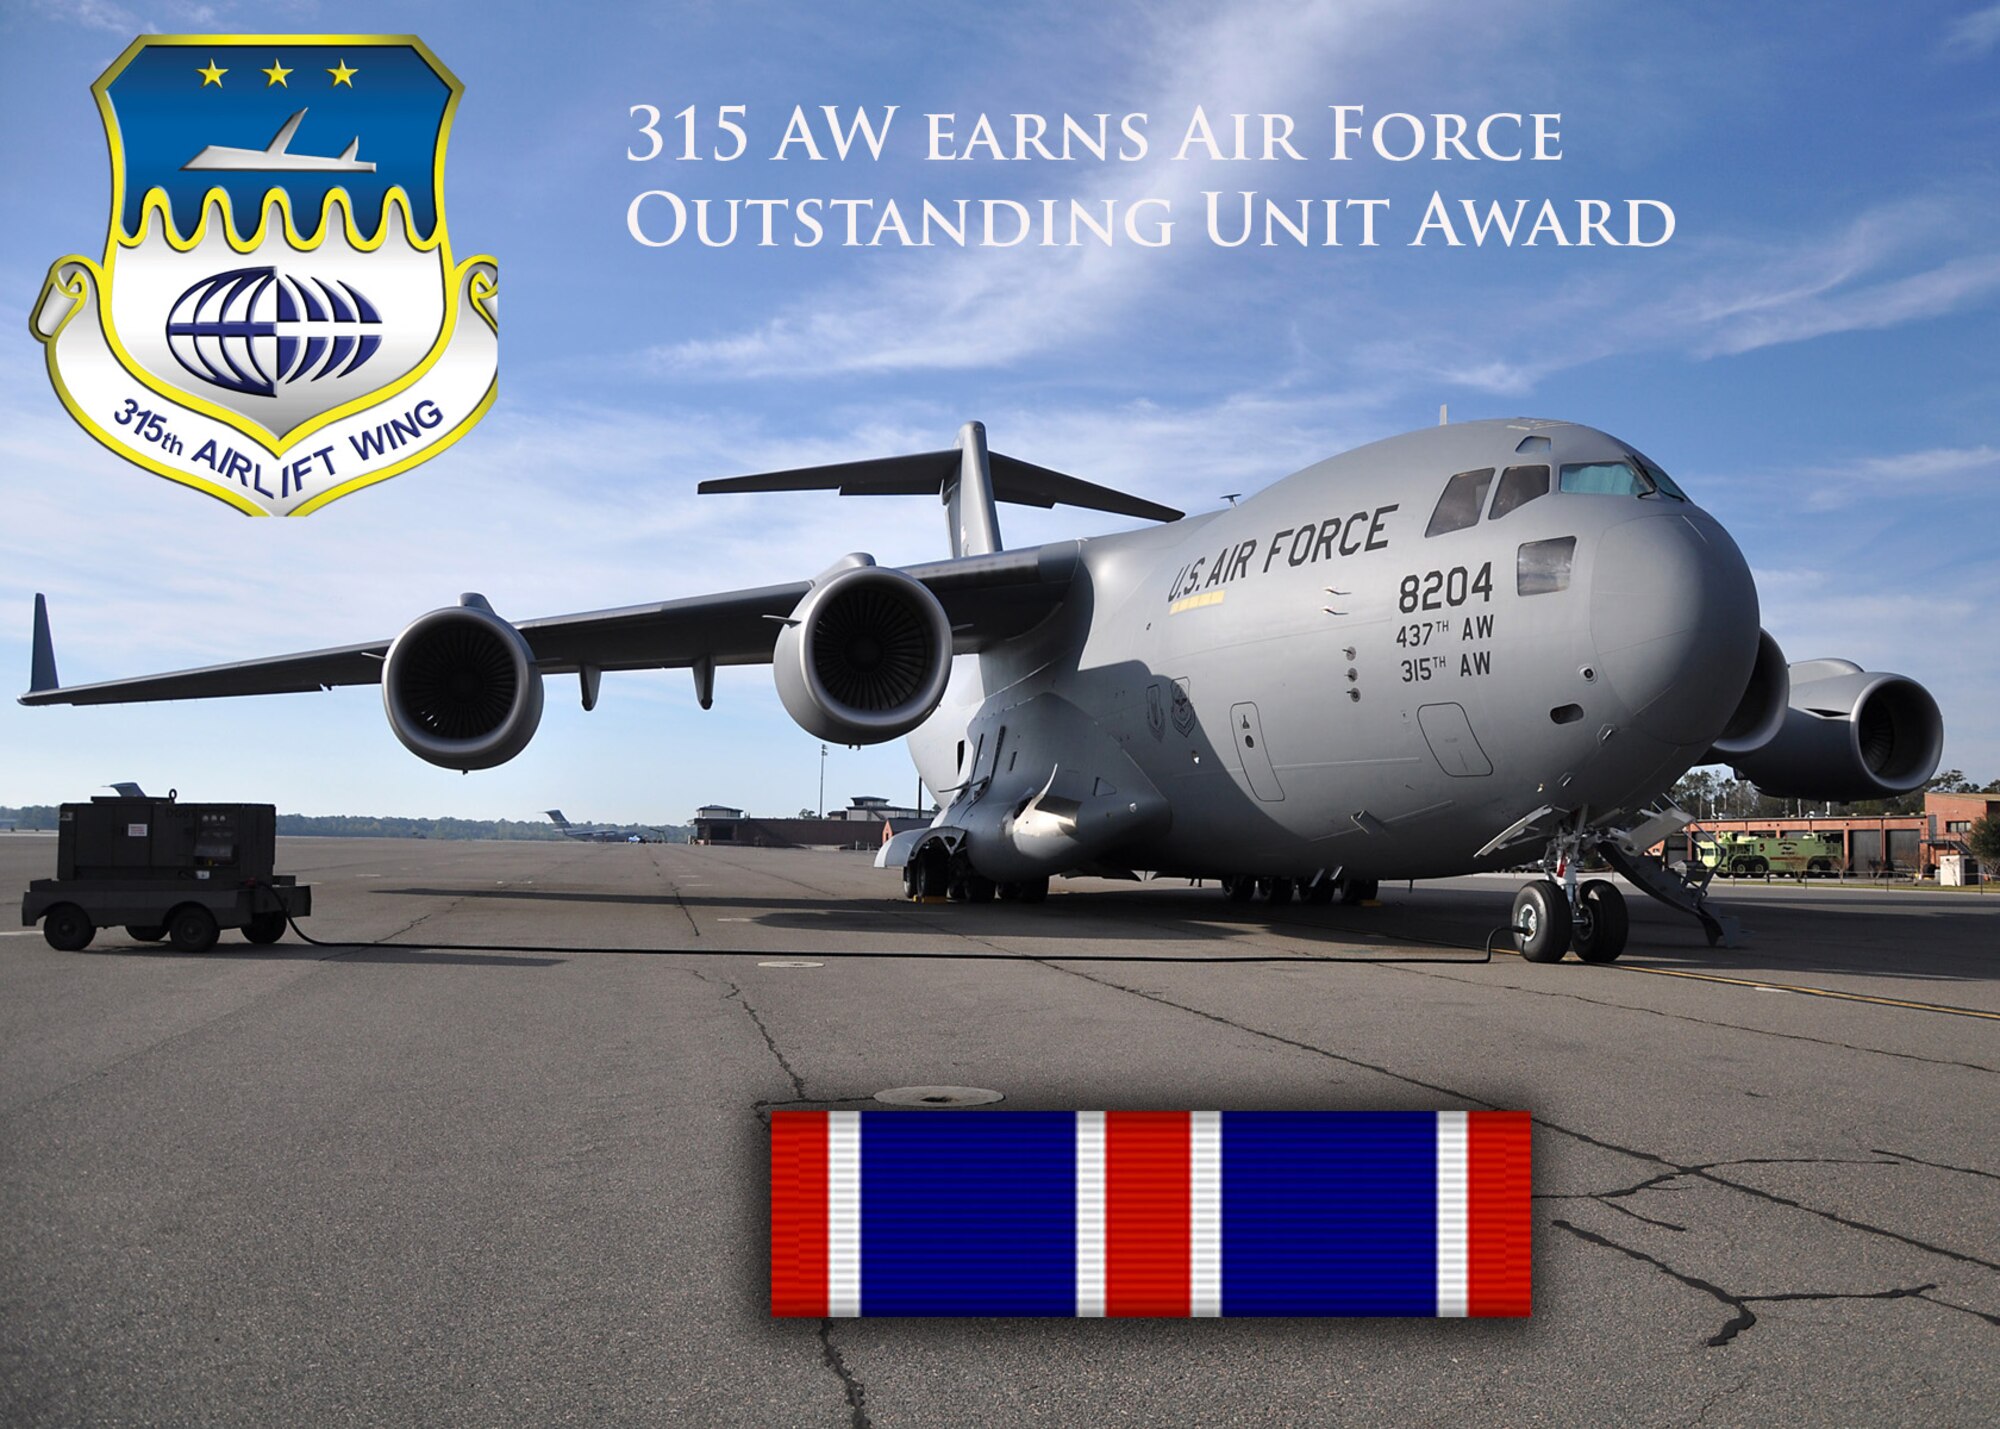 Air Force Reserve Command announced Thursday that the 315th Airlift Wing is being awarded an Air Force Oustanding Unit Award for accomplishments during 2012. (U.S Air Force Illustration) 
